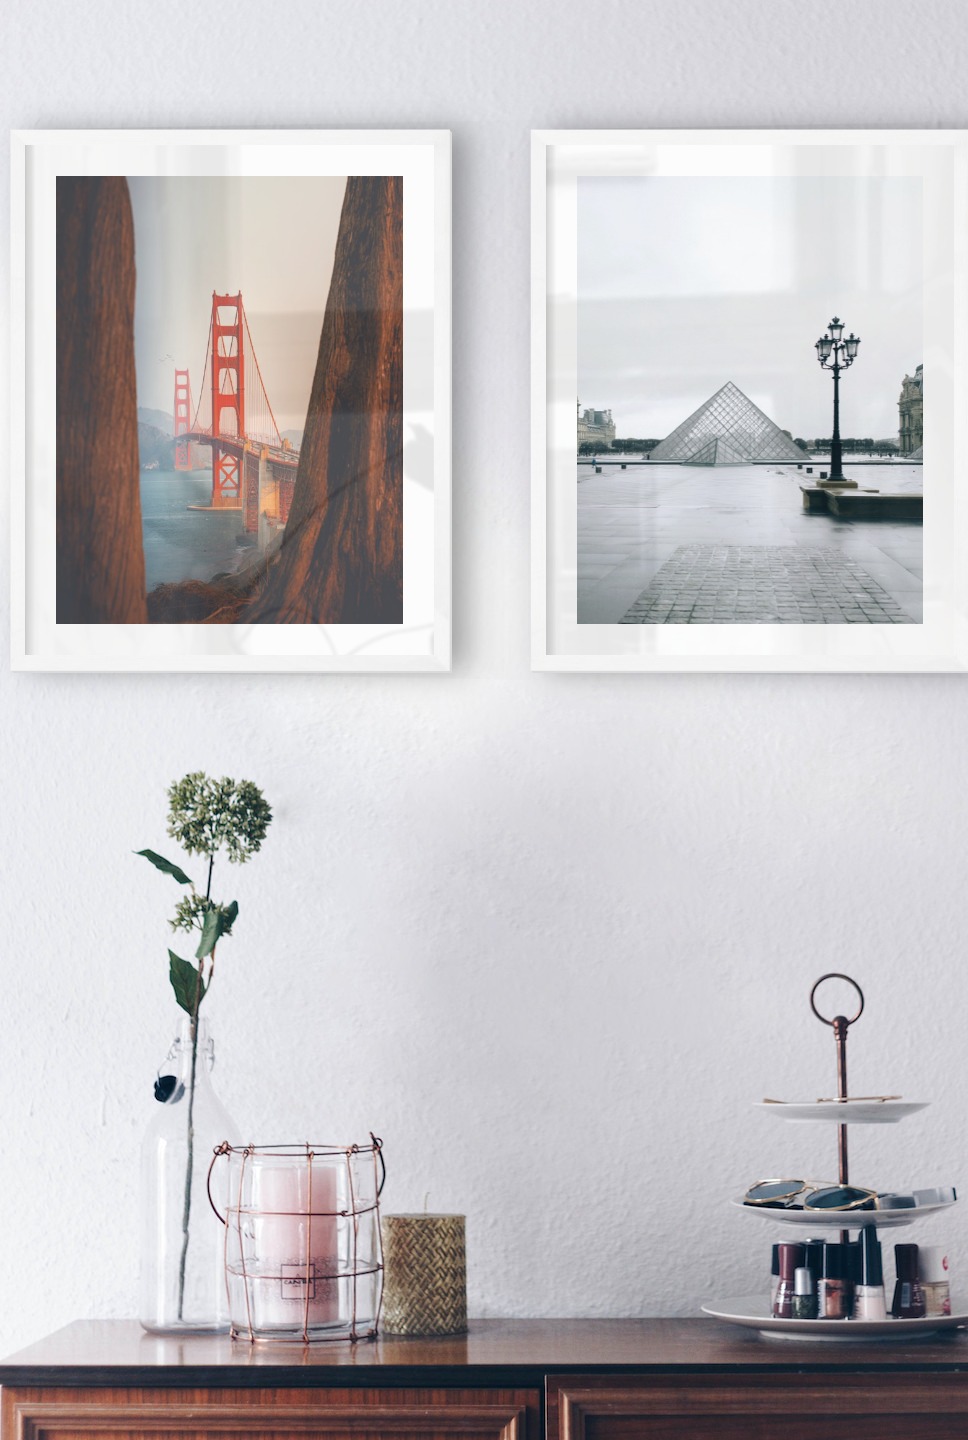 Gallery wall with picture frames in white in sizes 40x50 with prints "Golden Gate Bridge" and "Louvre in Paris"